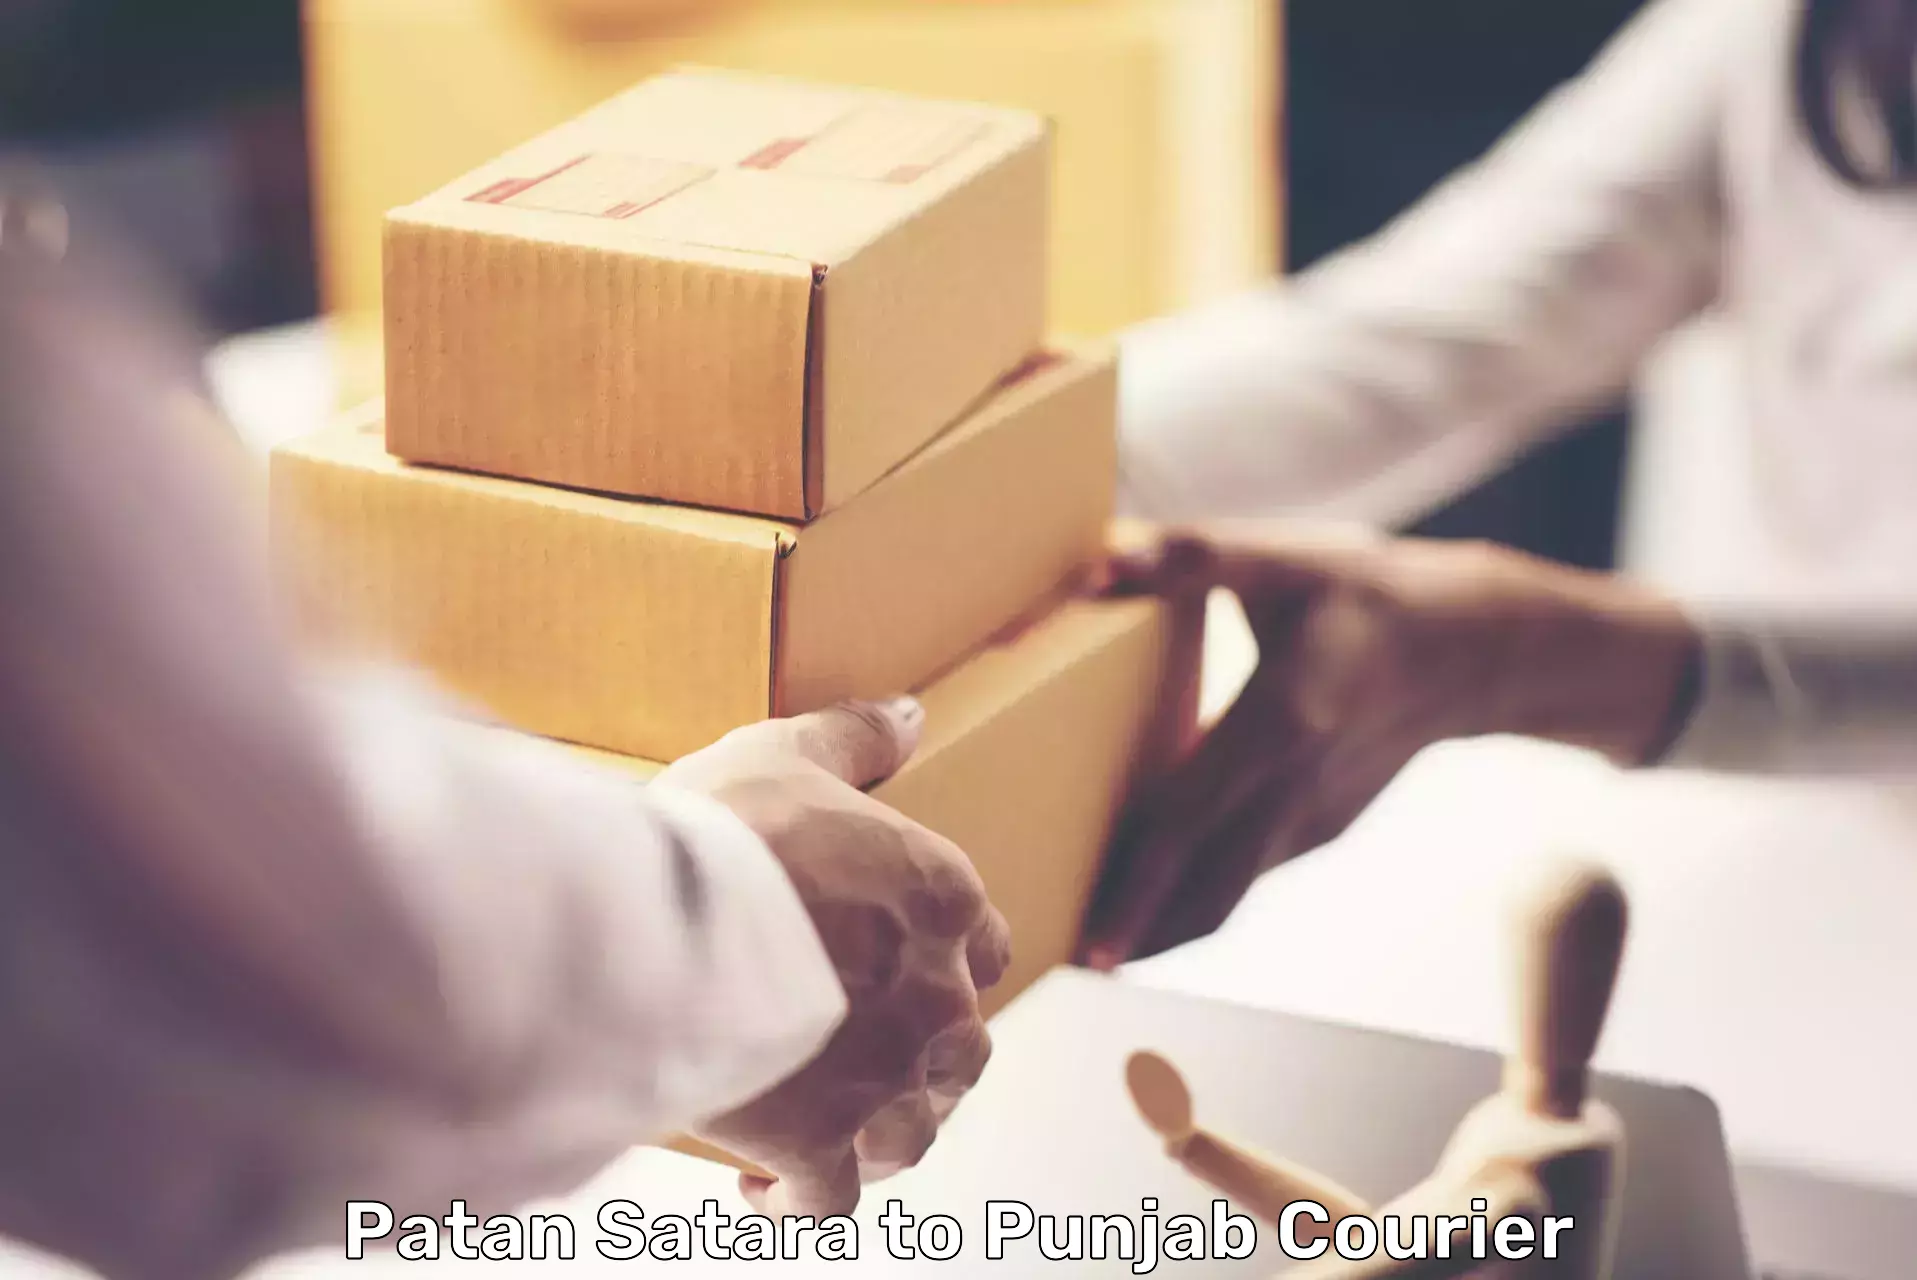 State-of-the-art courier technology Patan Satara to Dharamkot